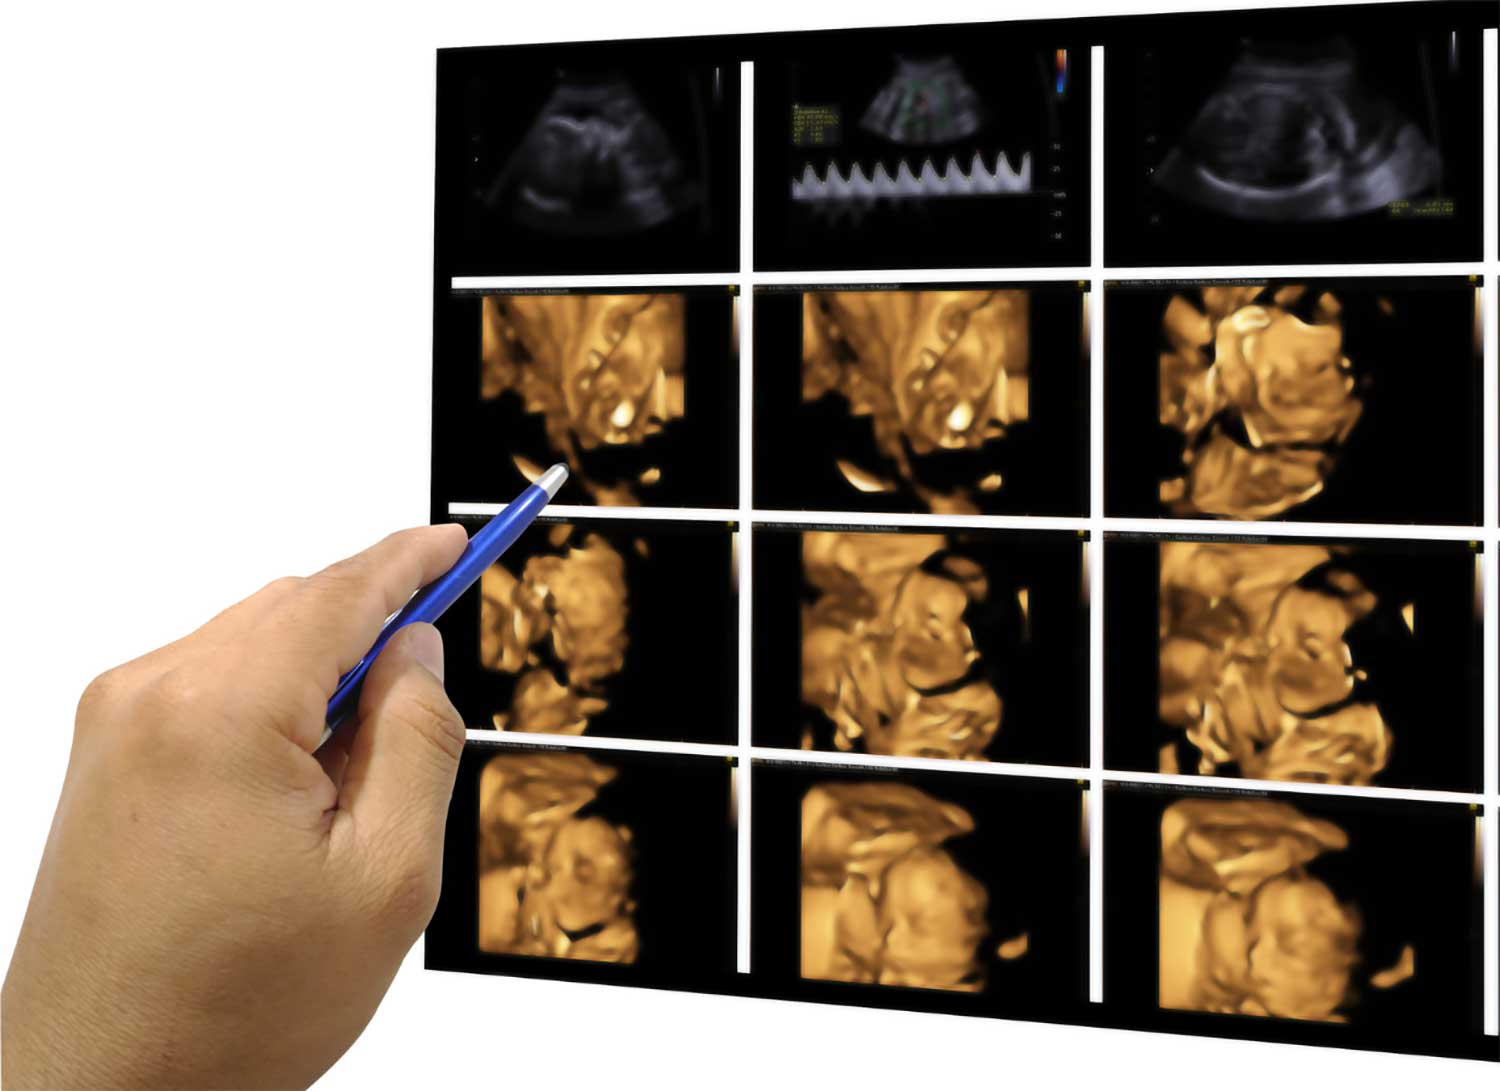 High-quality imaging results of a combined 3D and 4D ultrasound